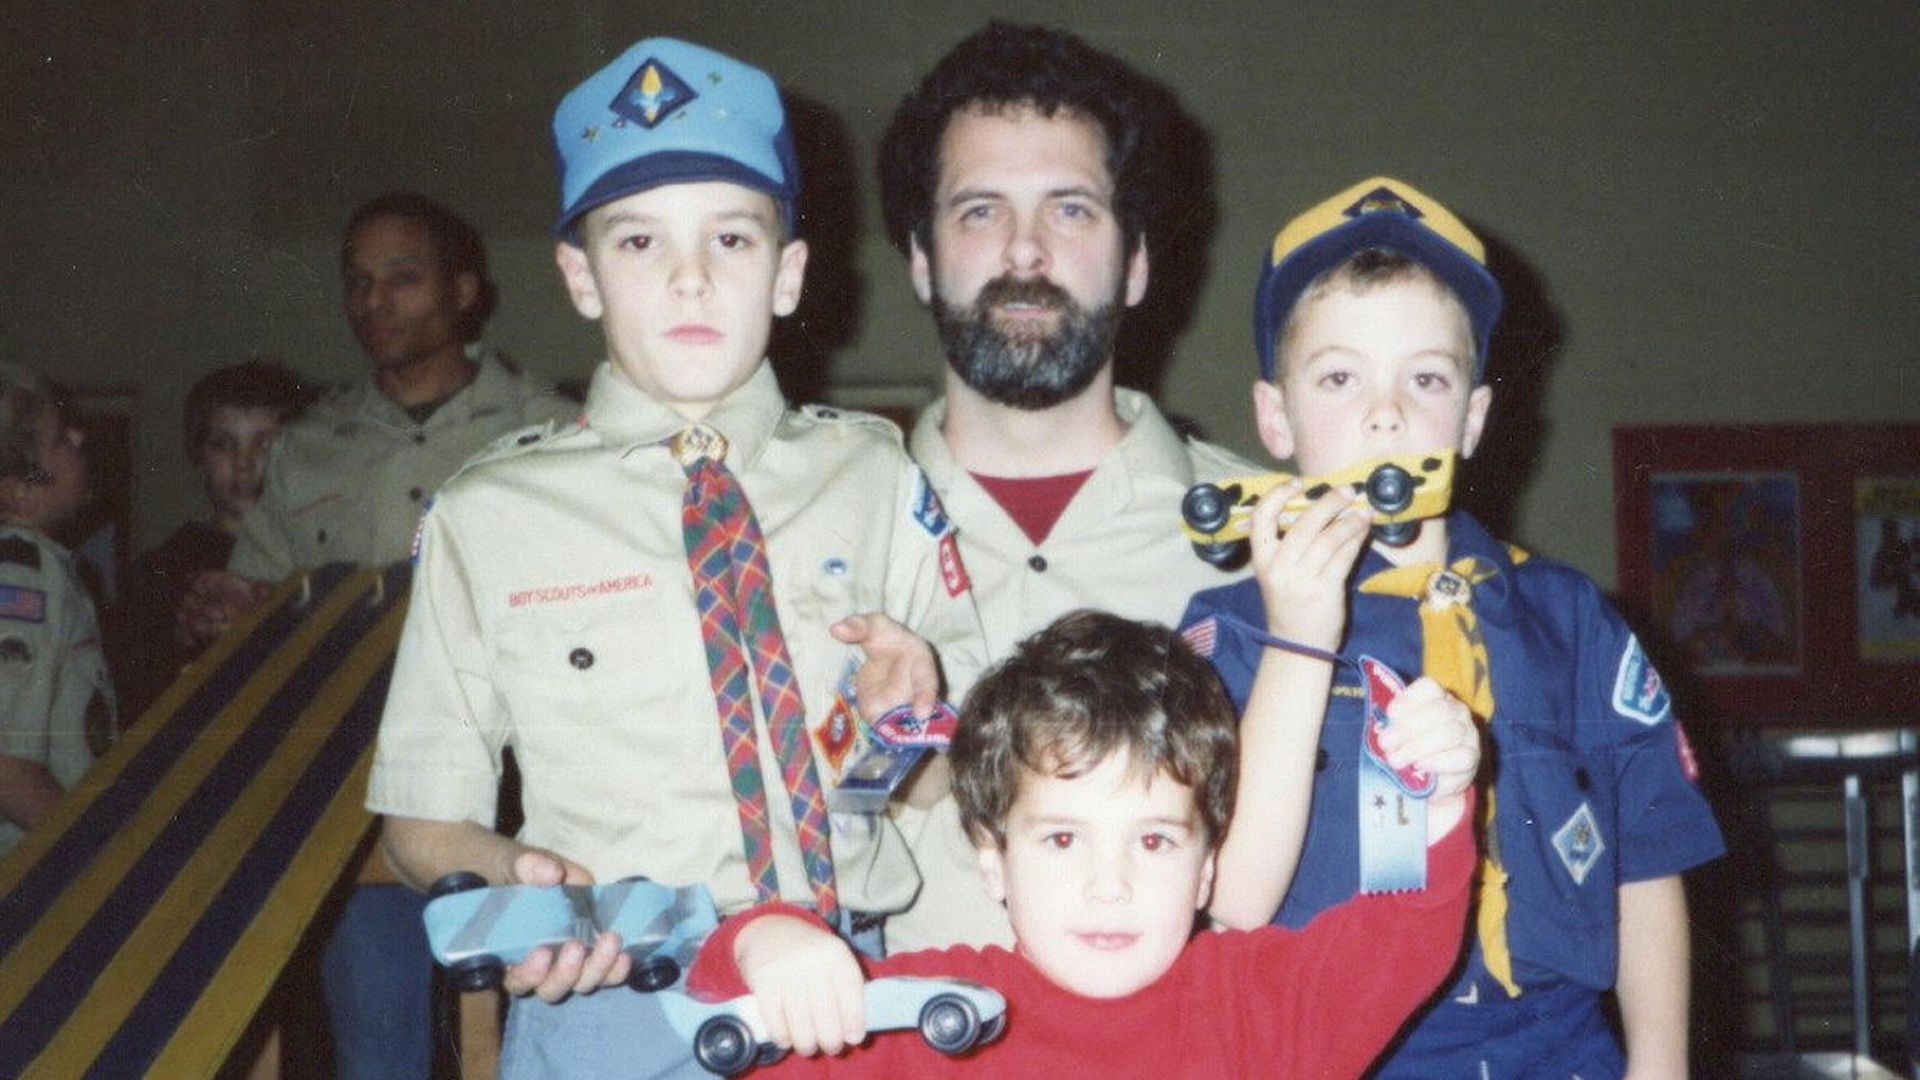 One white man and three white boys posing for a picture in Boy Scouts attire